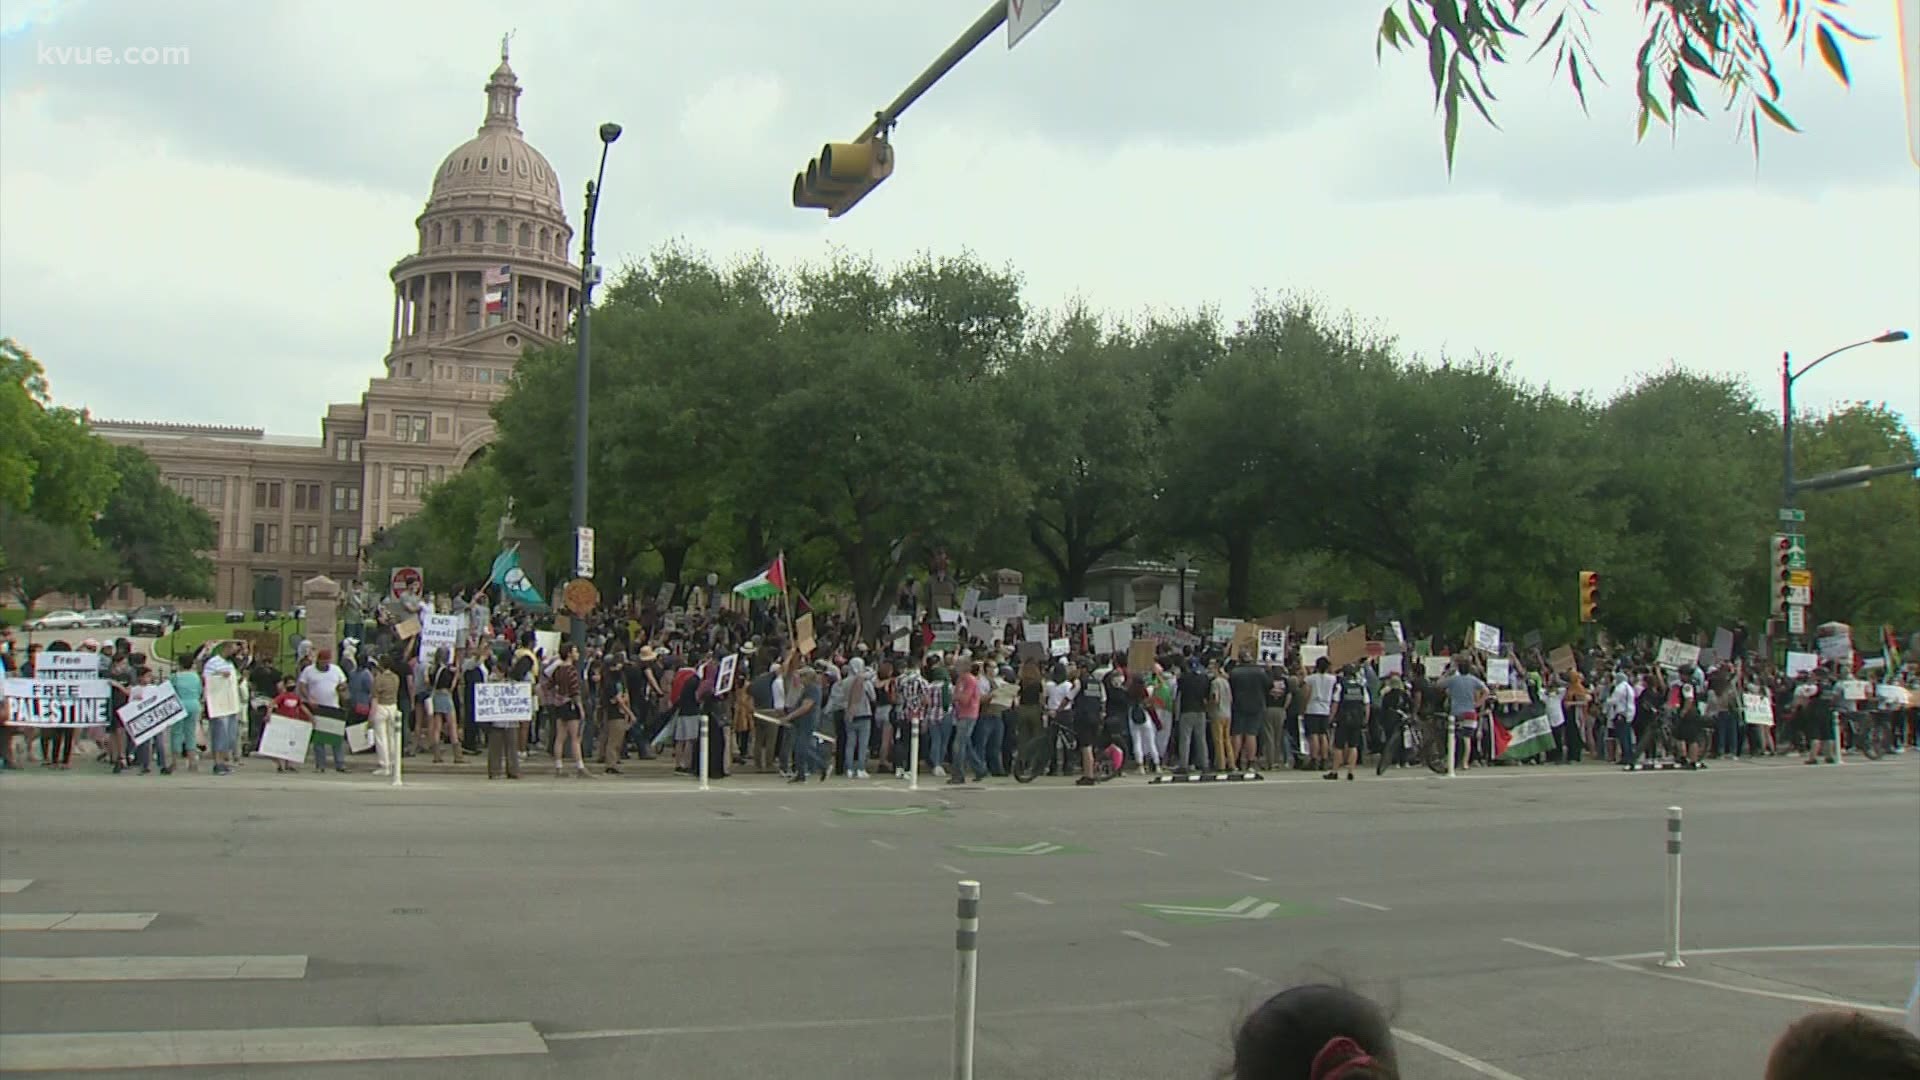 People in Austin tried to raise awareness about the unrest between Palestine and Israel. A crowd gathered outside the Texas Capitol and marched through the streets.